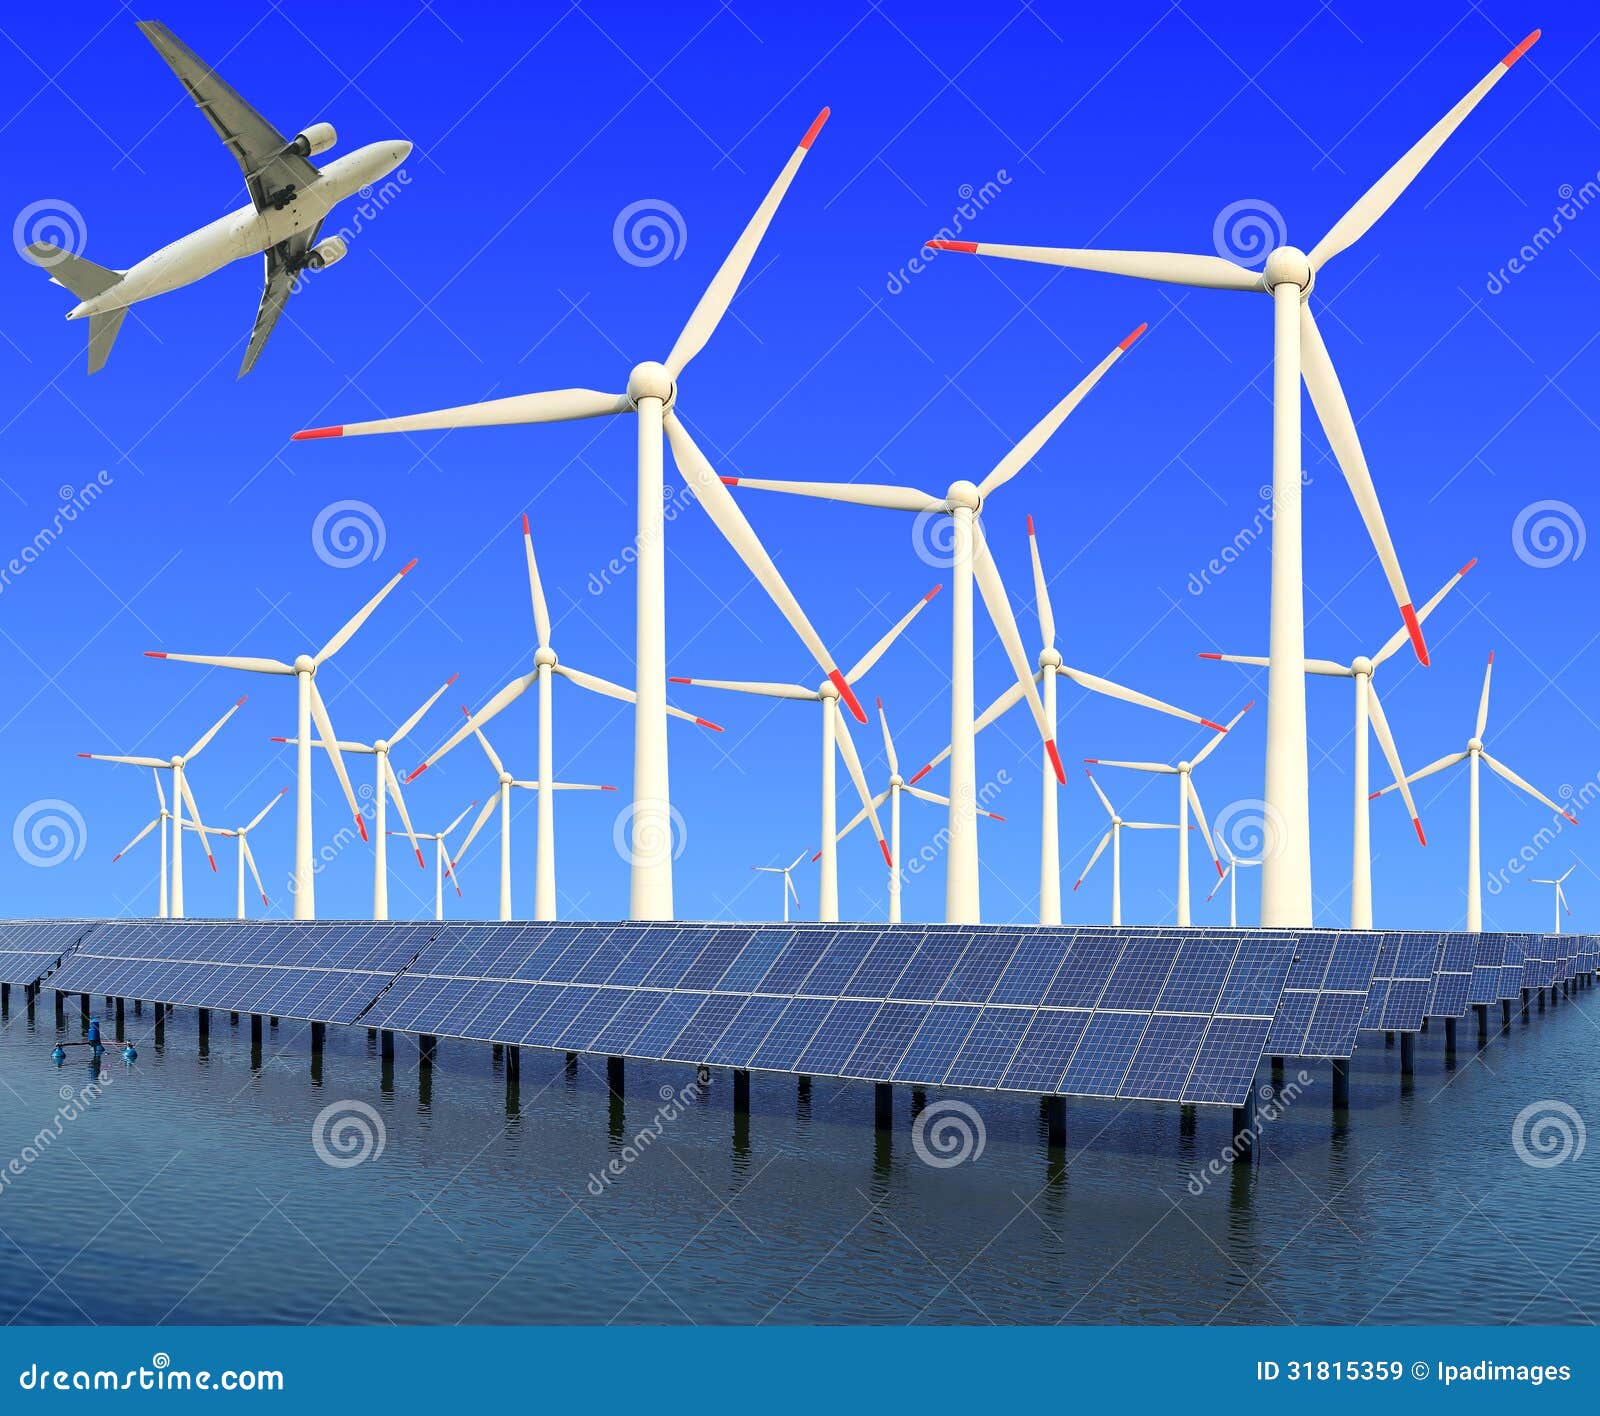  flying in eco power of wind turbines and solar panel plant at concept